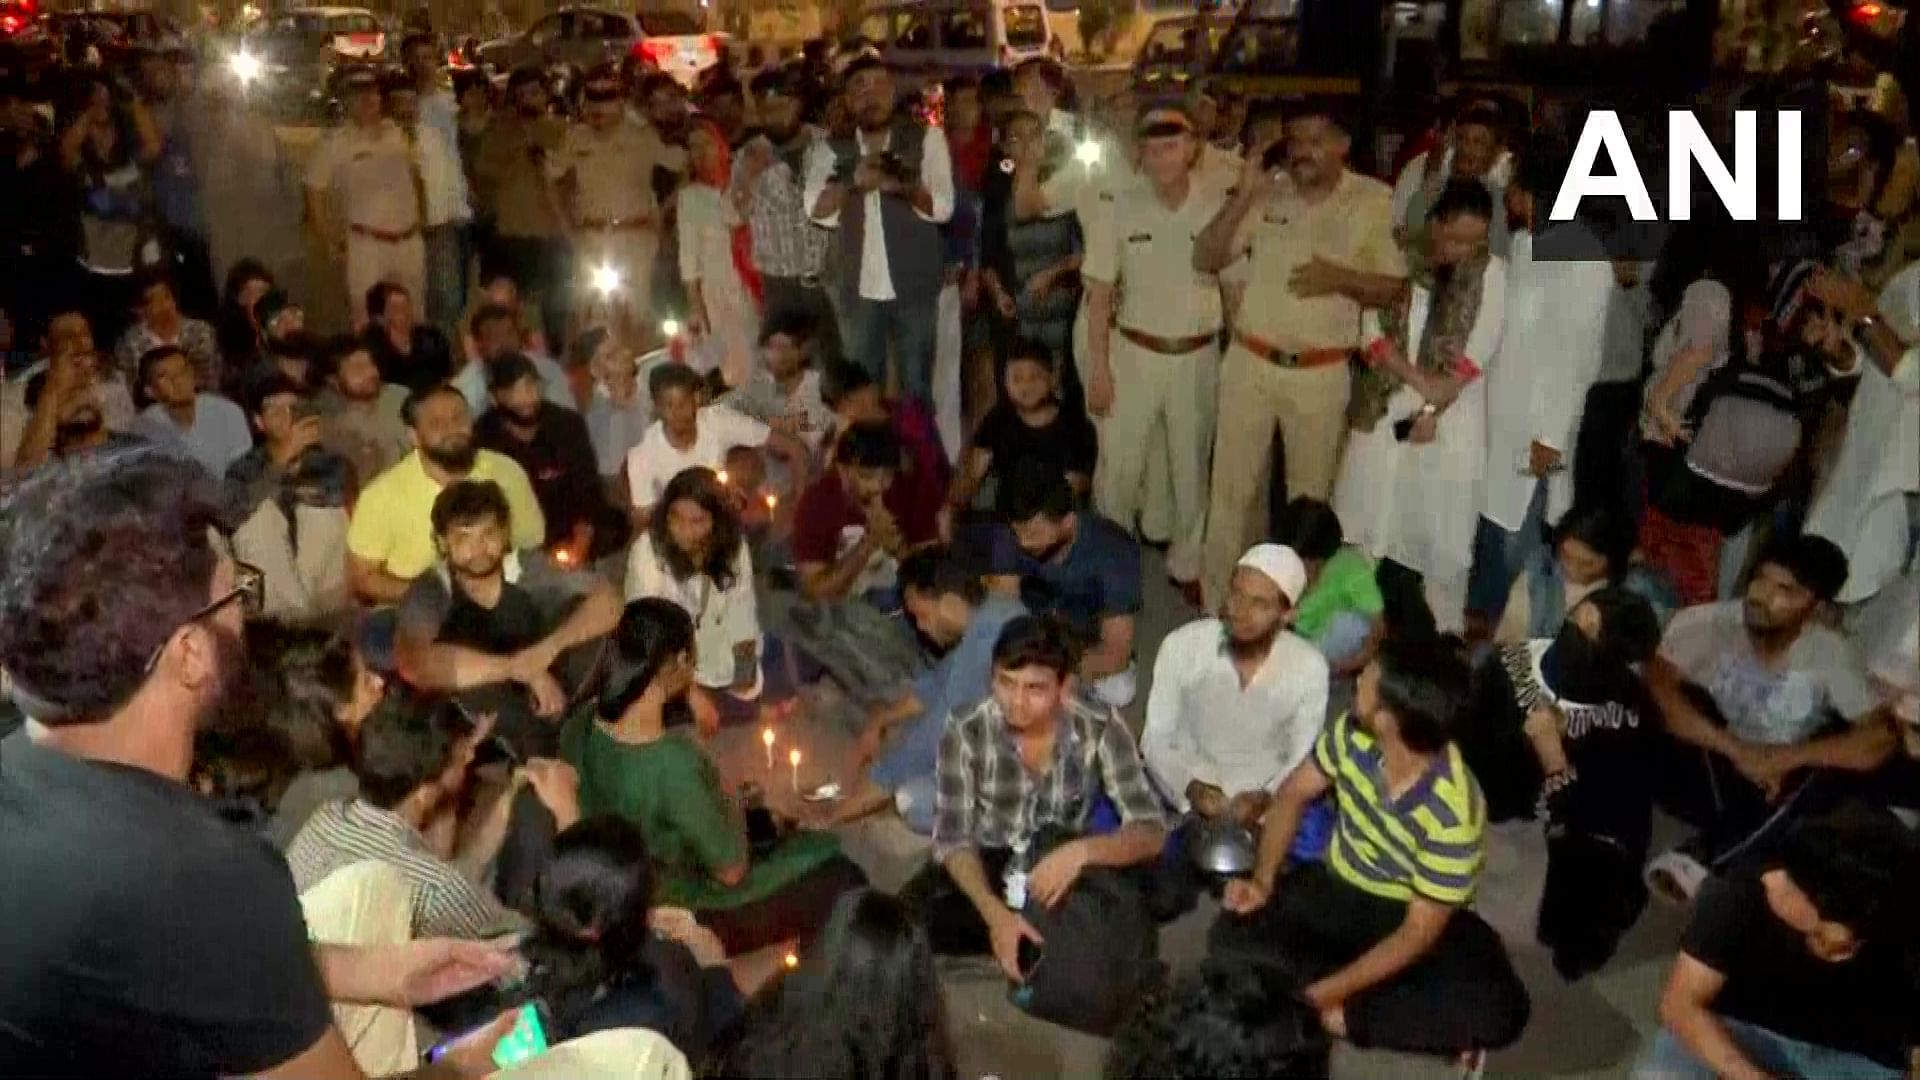 Protesters gathered at Marine Drive detained by Mumbai police